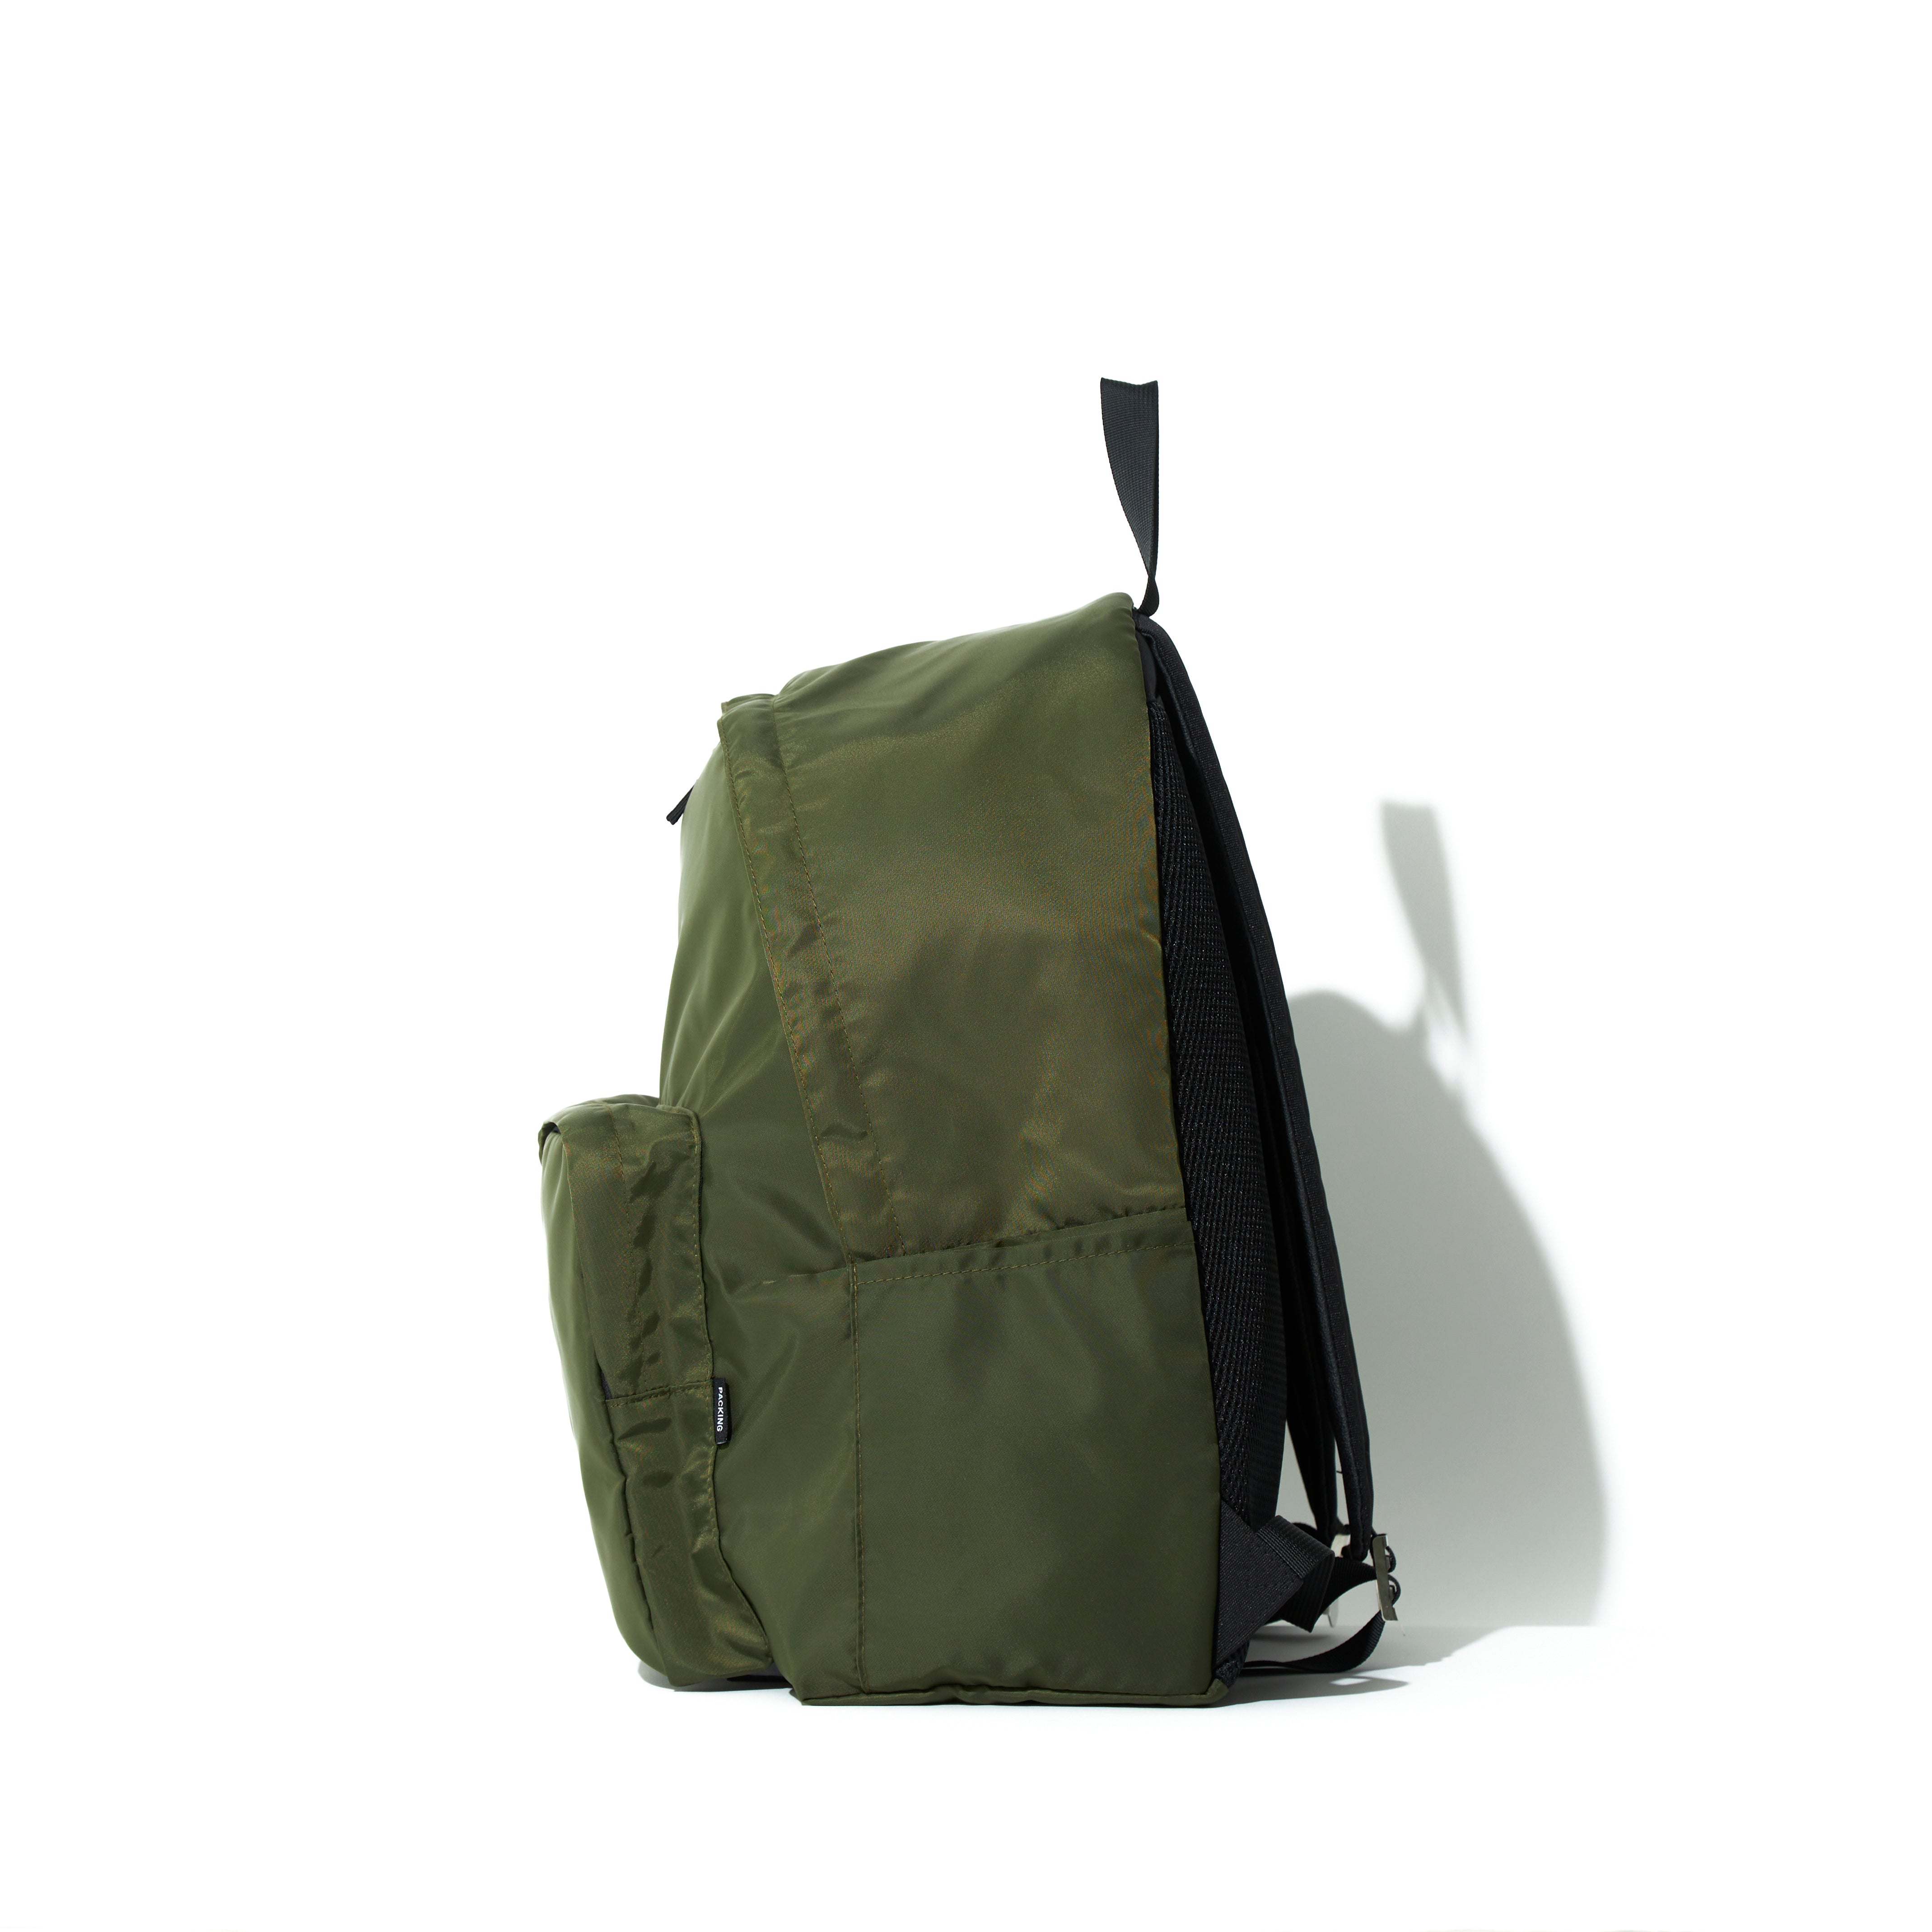 DOUBLE POCKET BACKPACK / PACKING